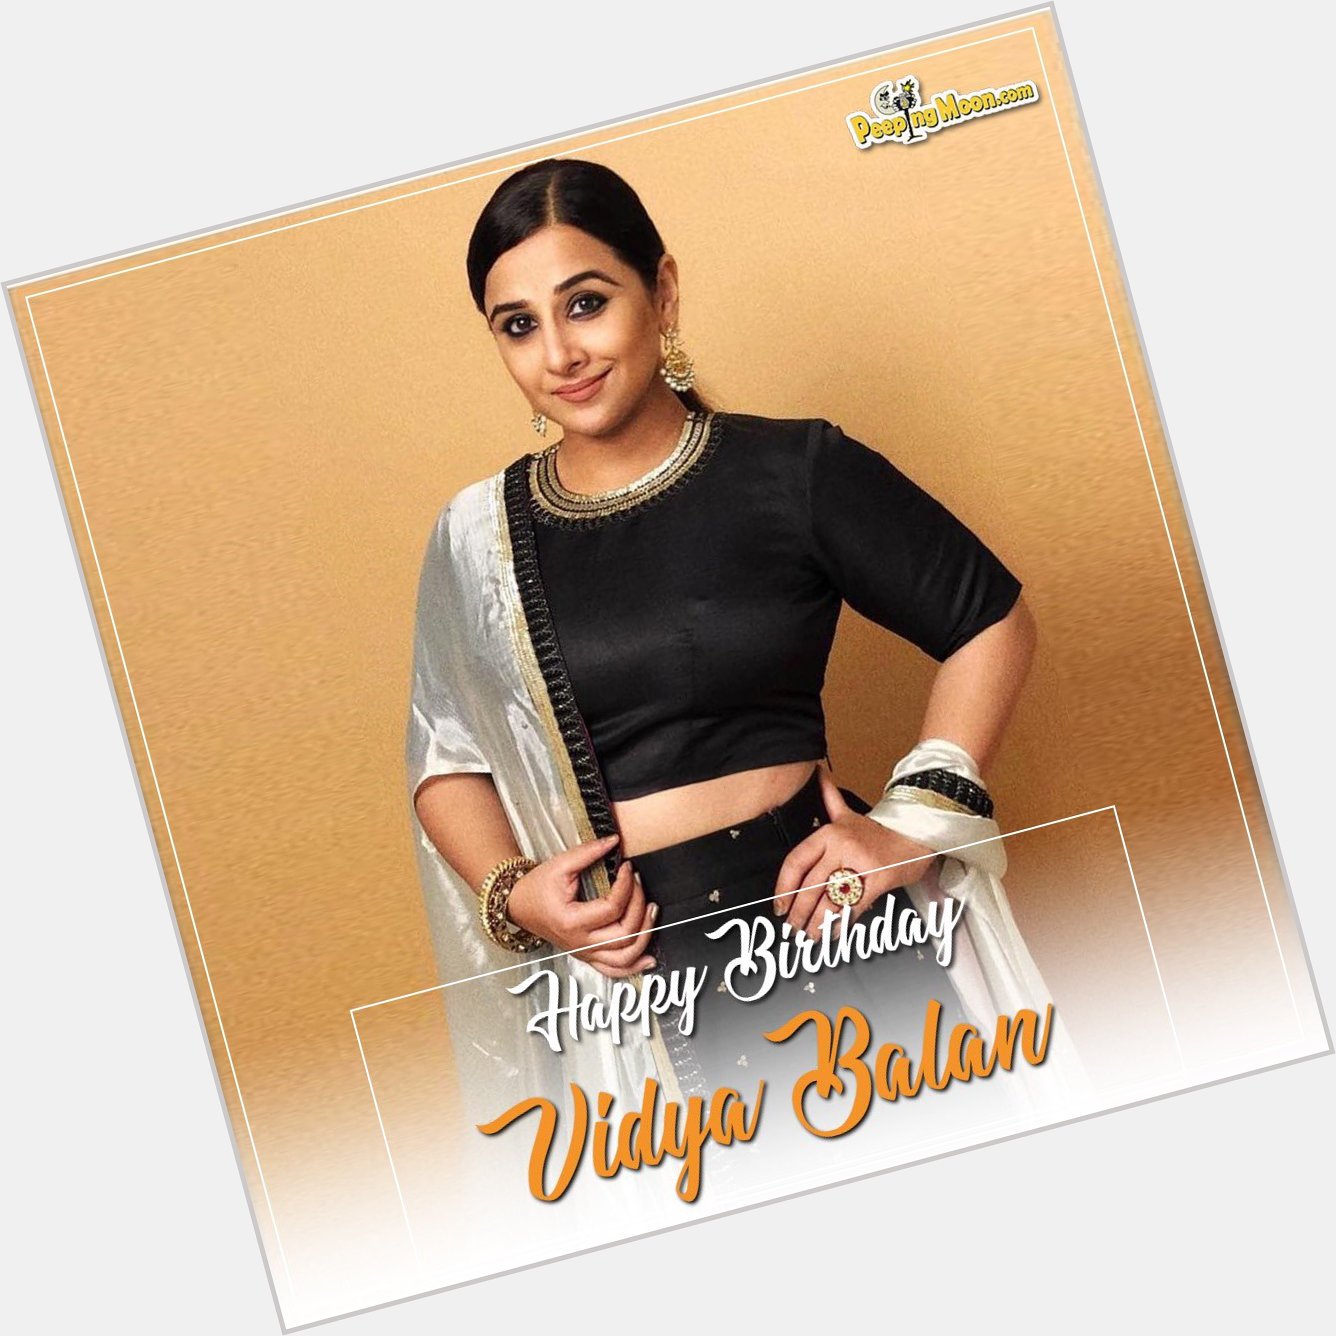 Team wishes a very Happy birthday to gorgeous   